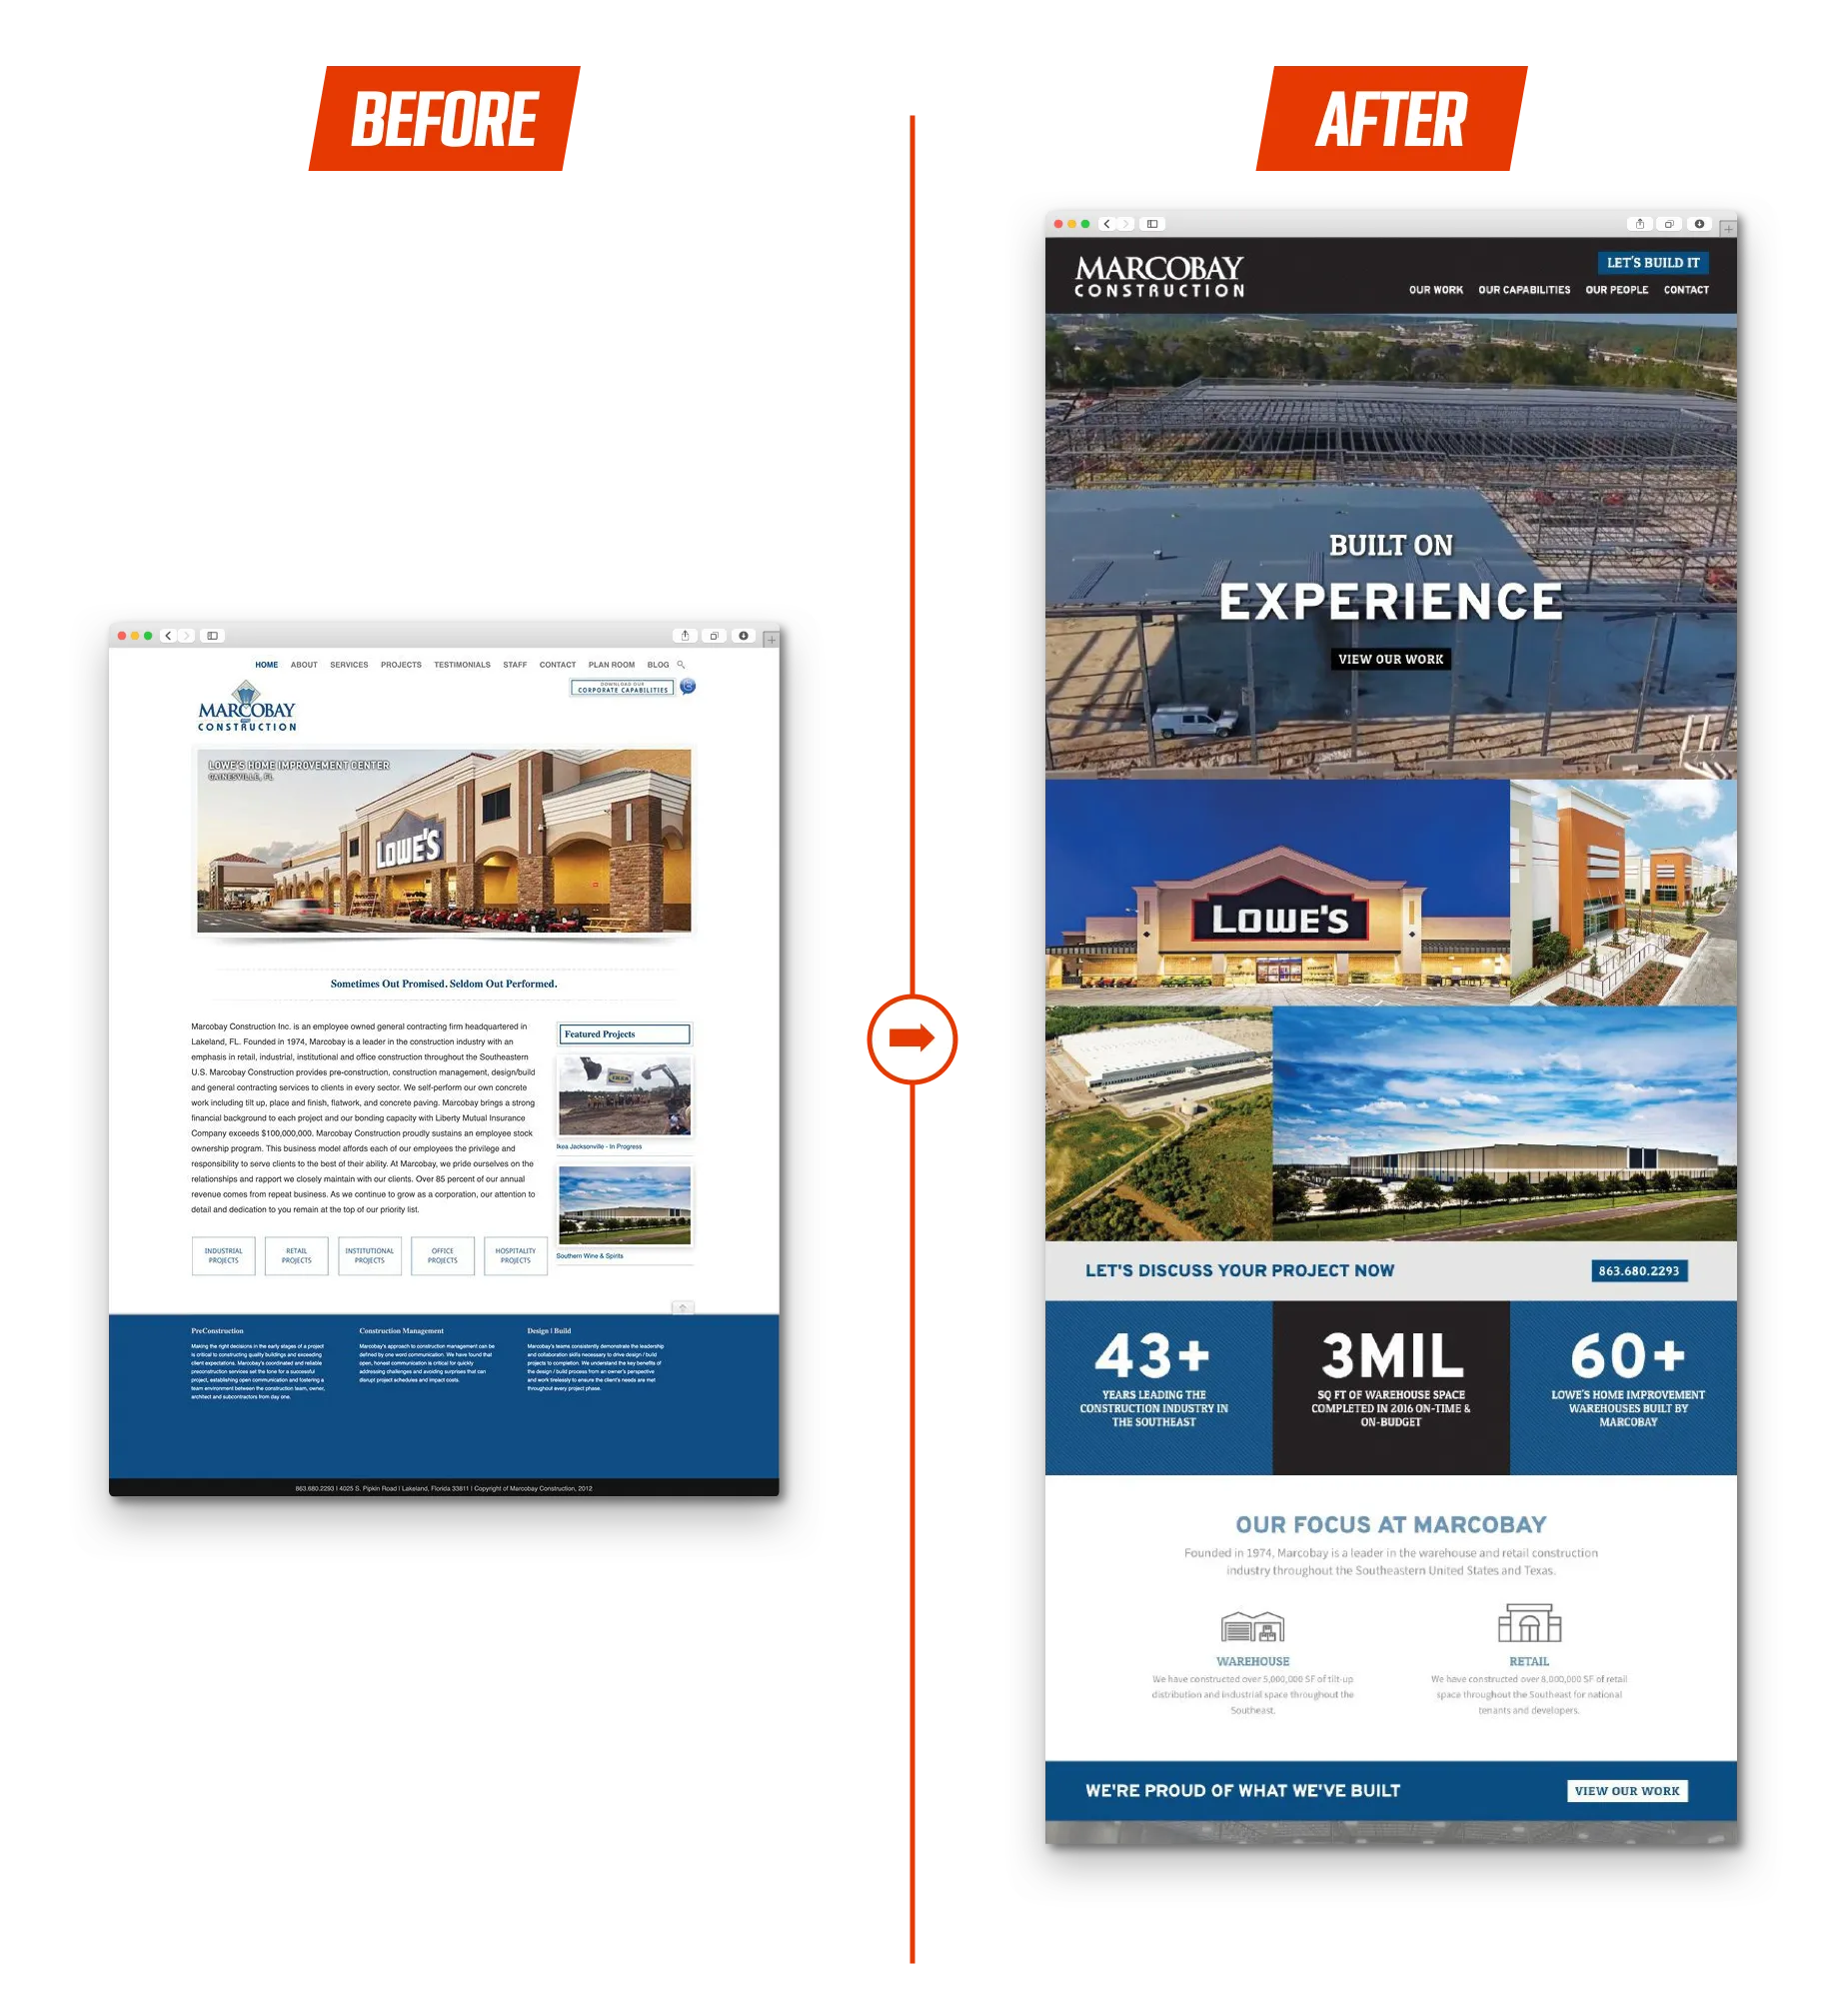 Corporate web design showing images of before and after